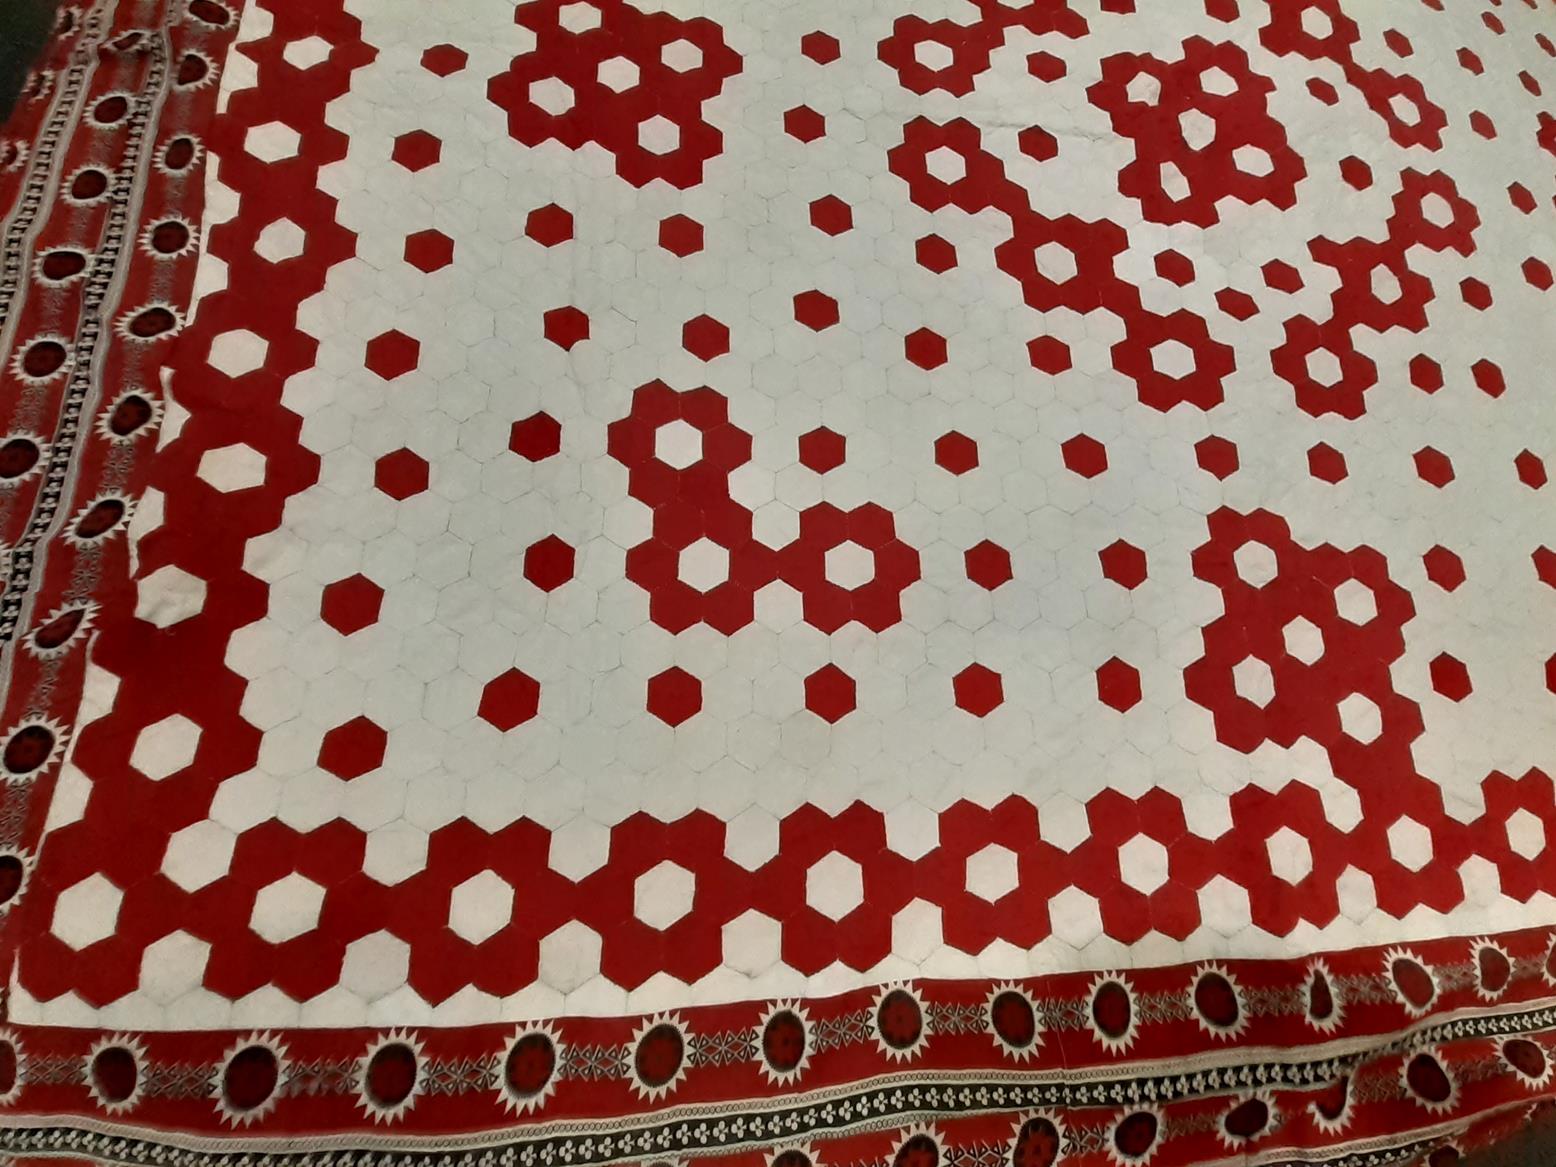 Late 19th Century Red and White Hexagonal Patchwork Quilt, within a red, black and white stripped - Image 4 of 5